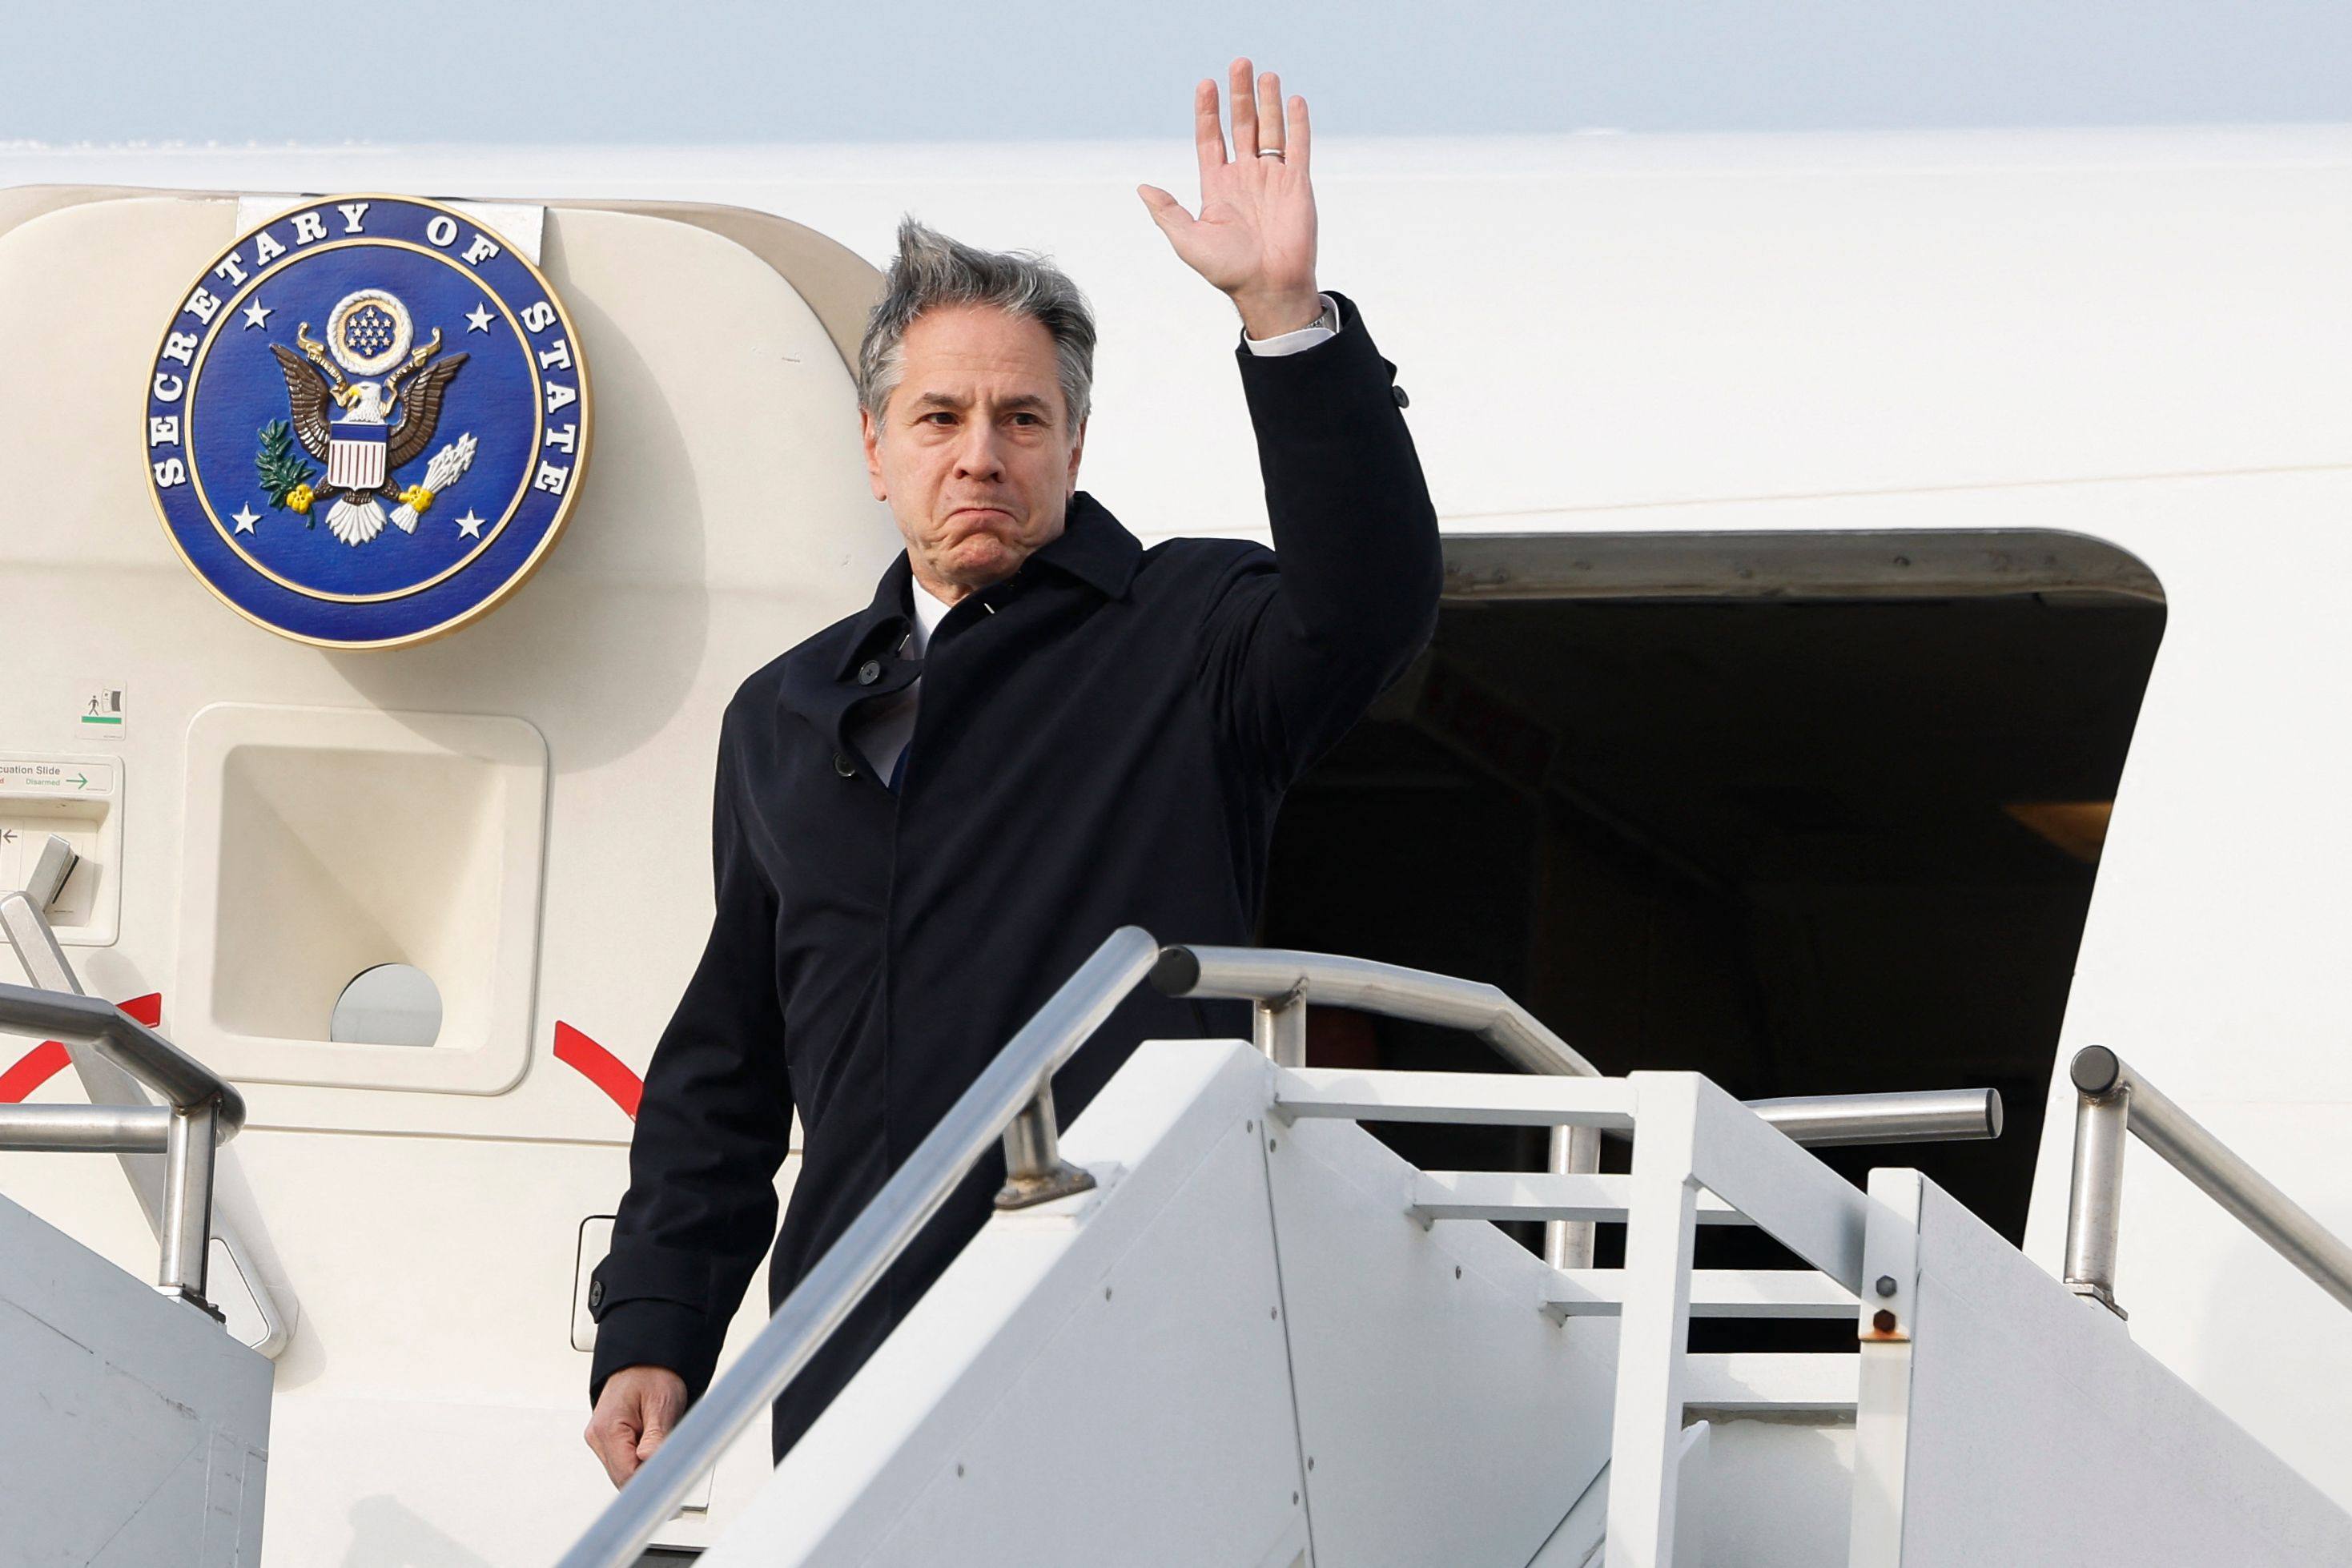 US Secretary of State Antony Blinken waves while disembarking from an aircraft as he arrives at Osan Air Base in Pyeongtaek on Sunday. Photo: AFP